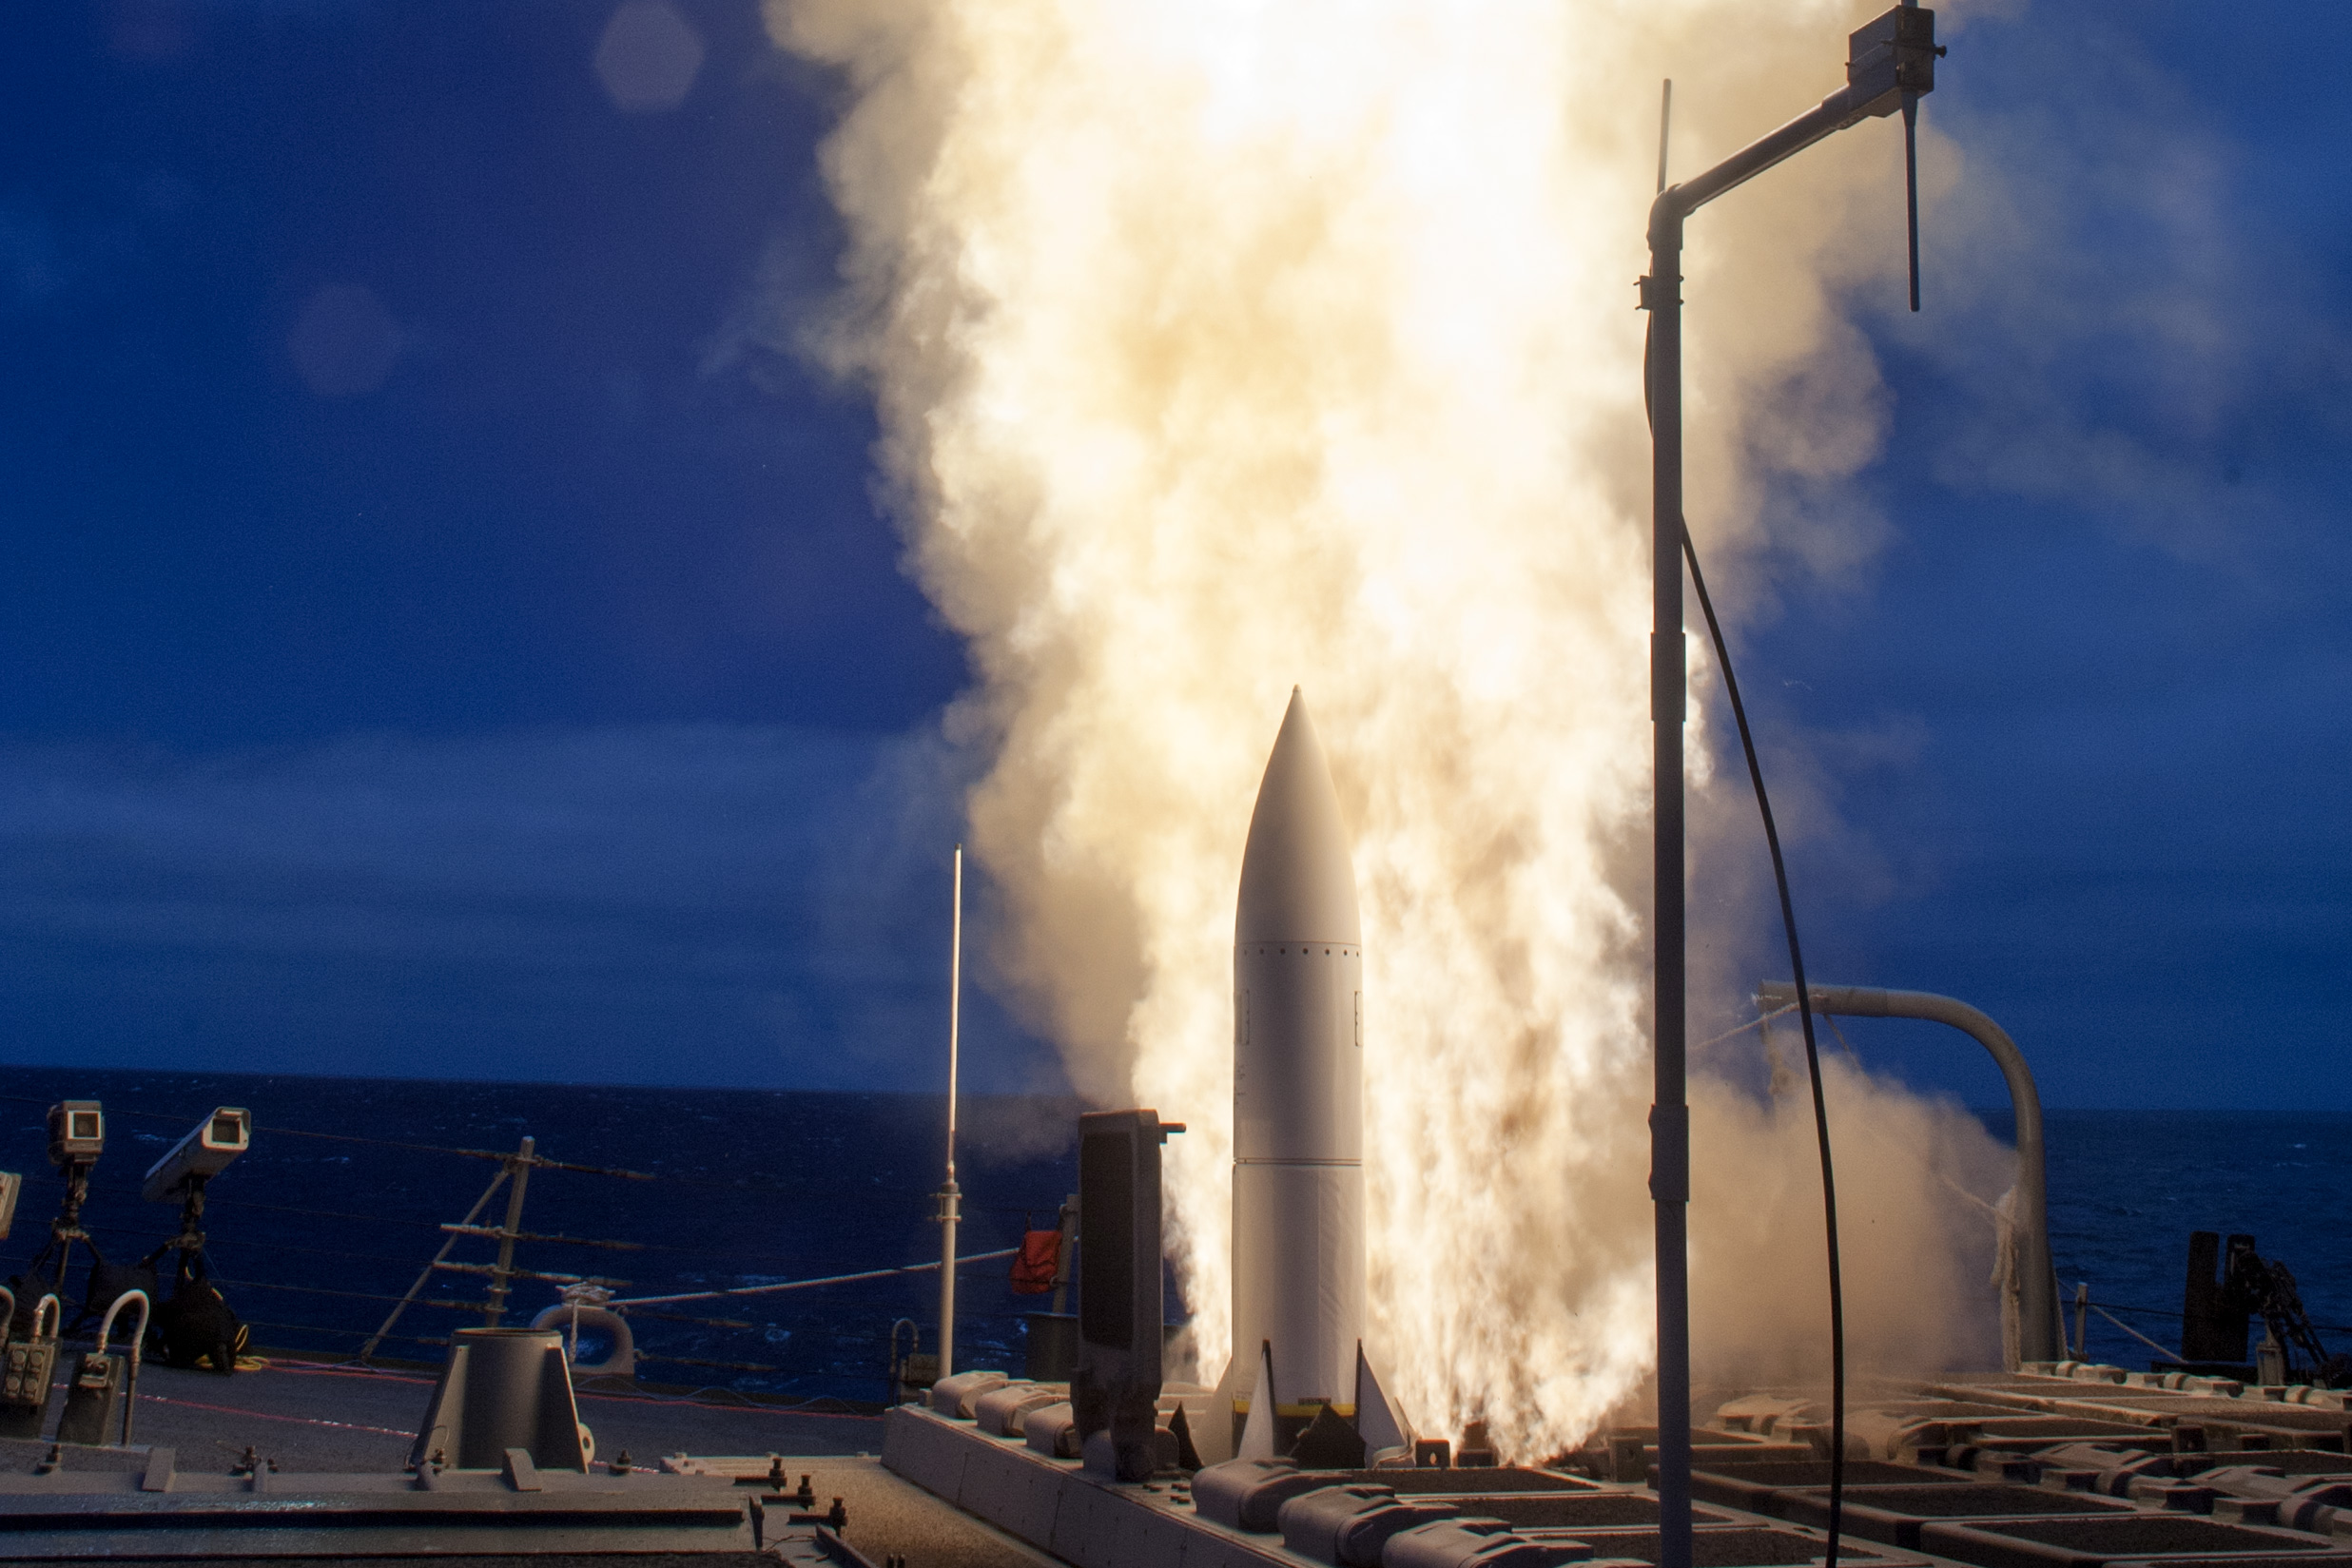 USS John Paul Jones (DDG 53) launches a Standard Missile 6 (SM-6) during a live-fire test of the ship's aegis weapons system on June 19, 2016. US Navy Photo